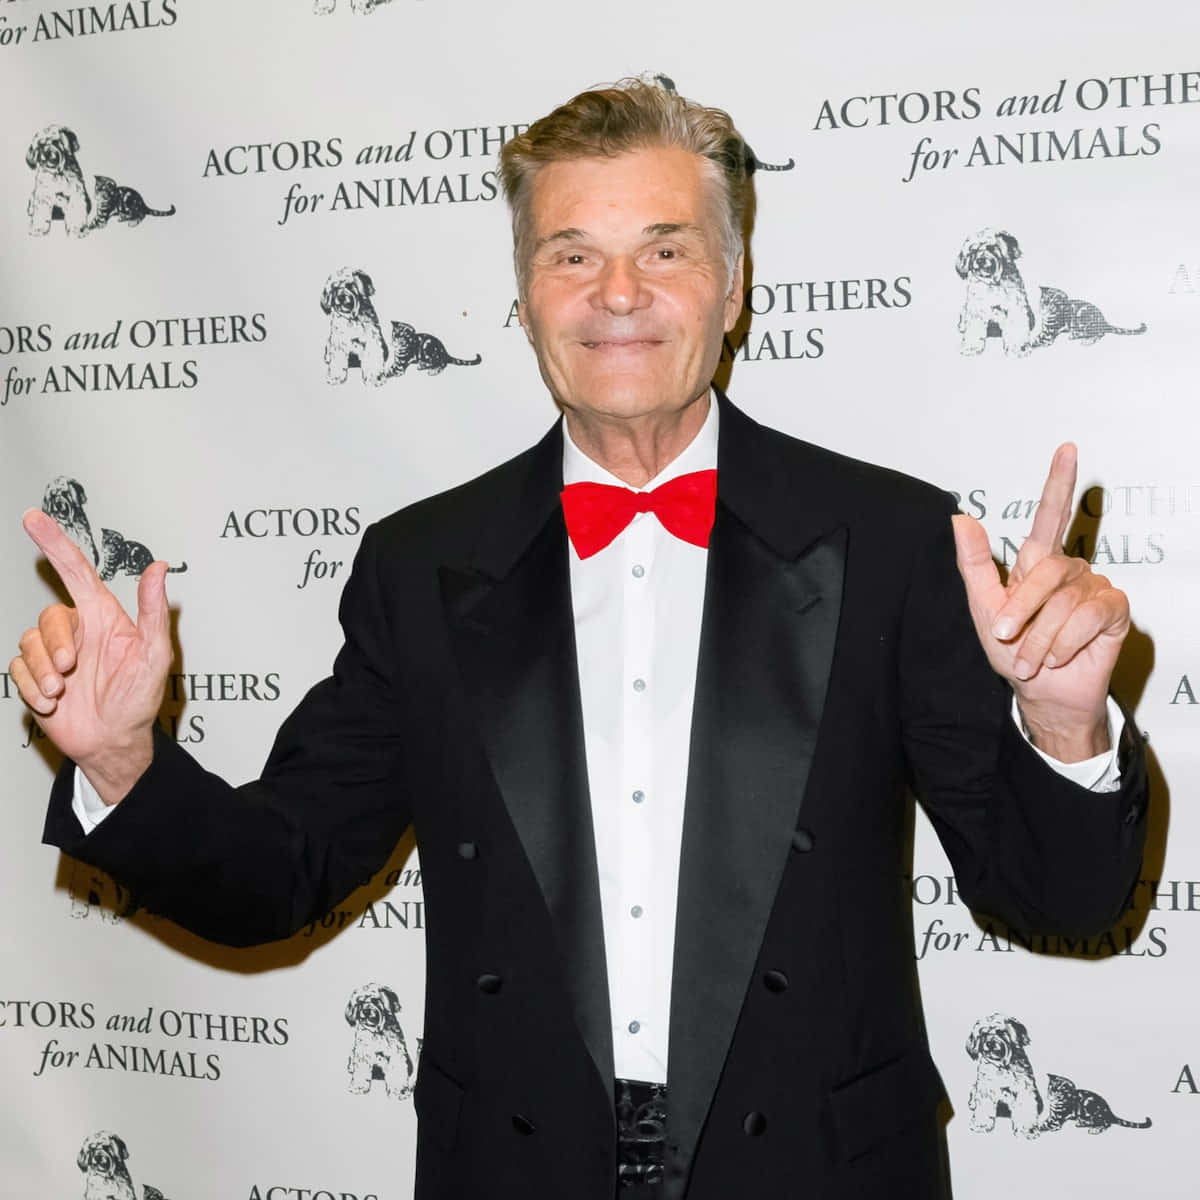 Fredwillard Is An Actor And Comedian Known For His Roles In Movies Such As 